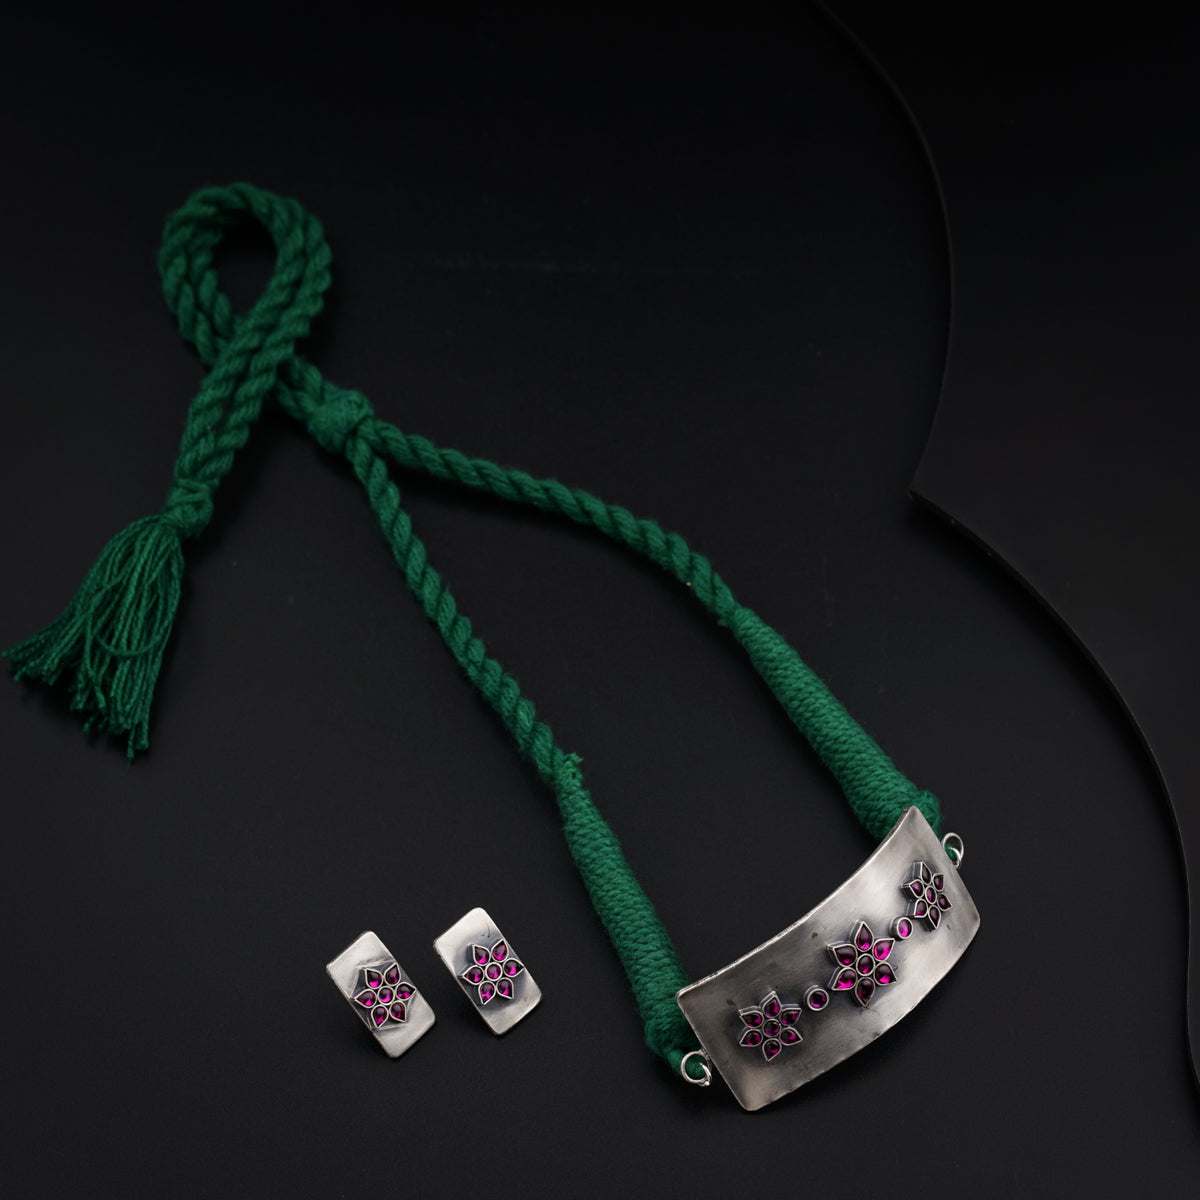 a pair of earrings and a green cord on a black surface